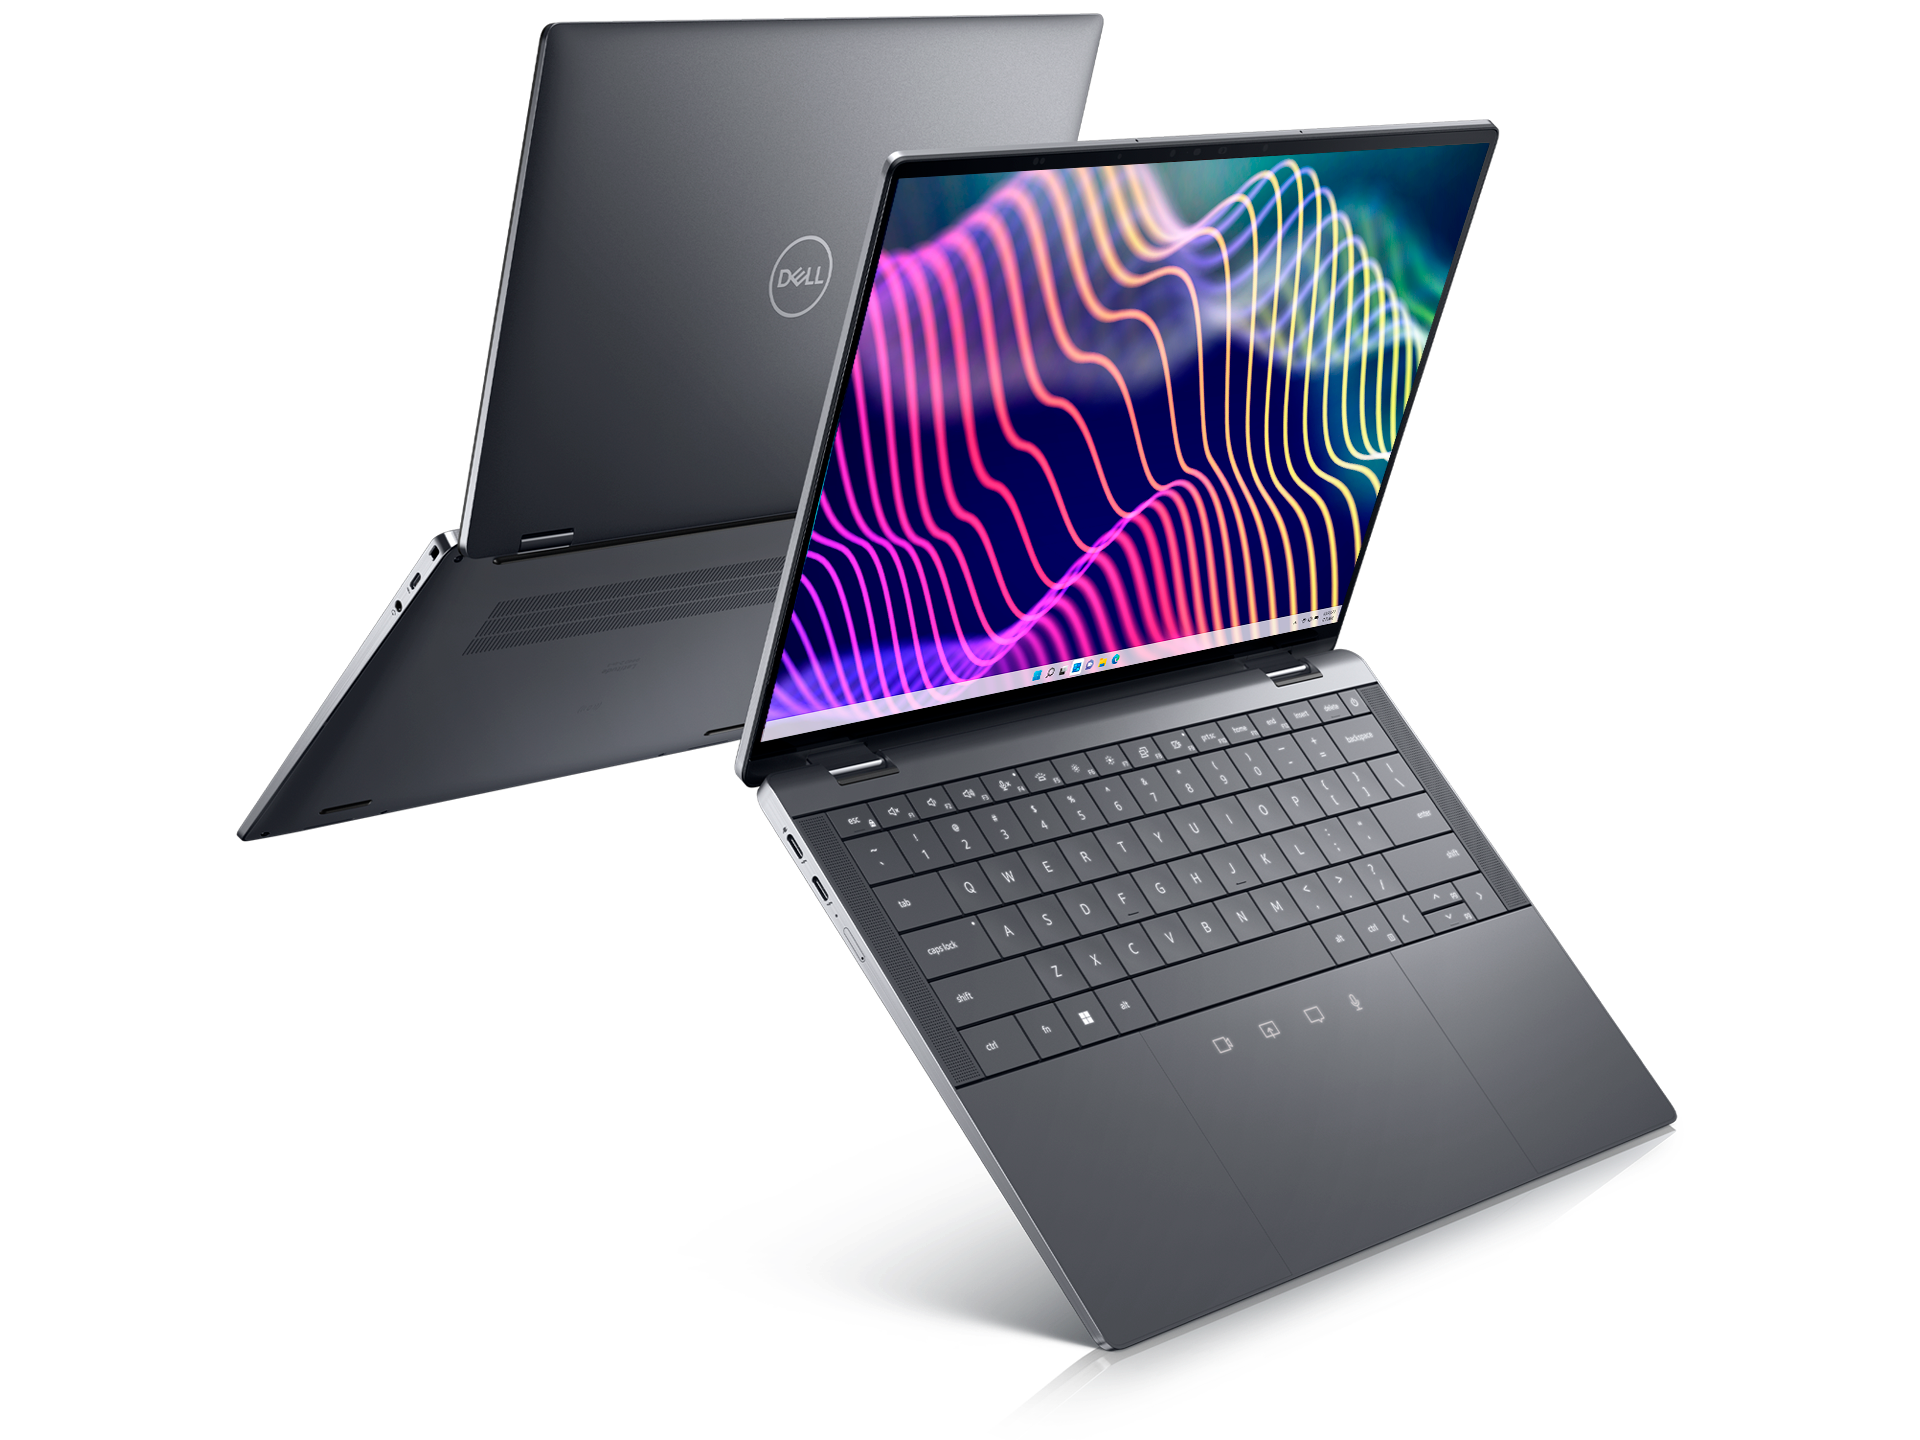 Meet the new Dell Latitude Family - Laptops and 2-in-1s